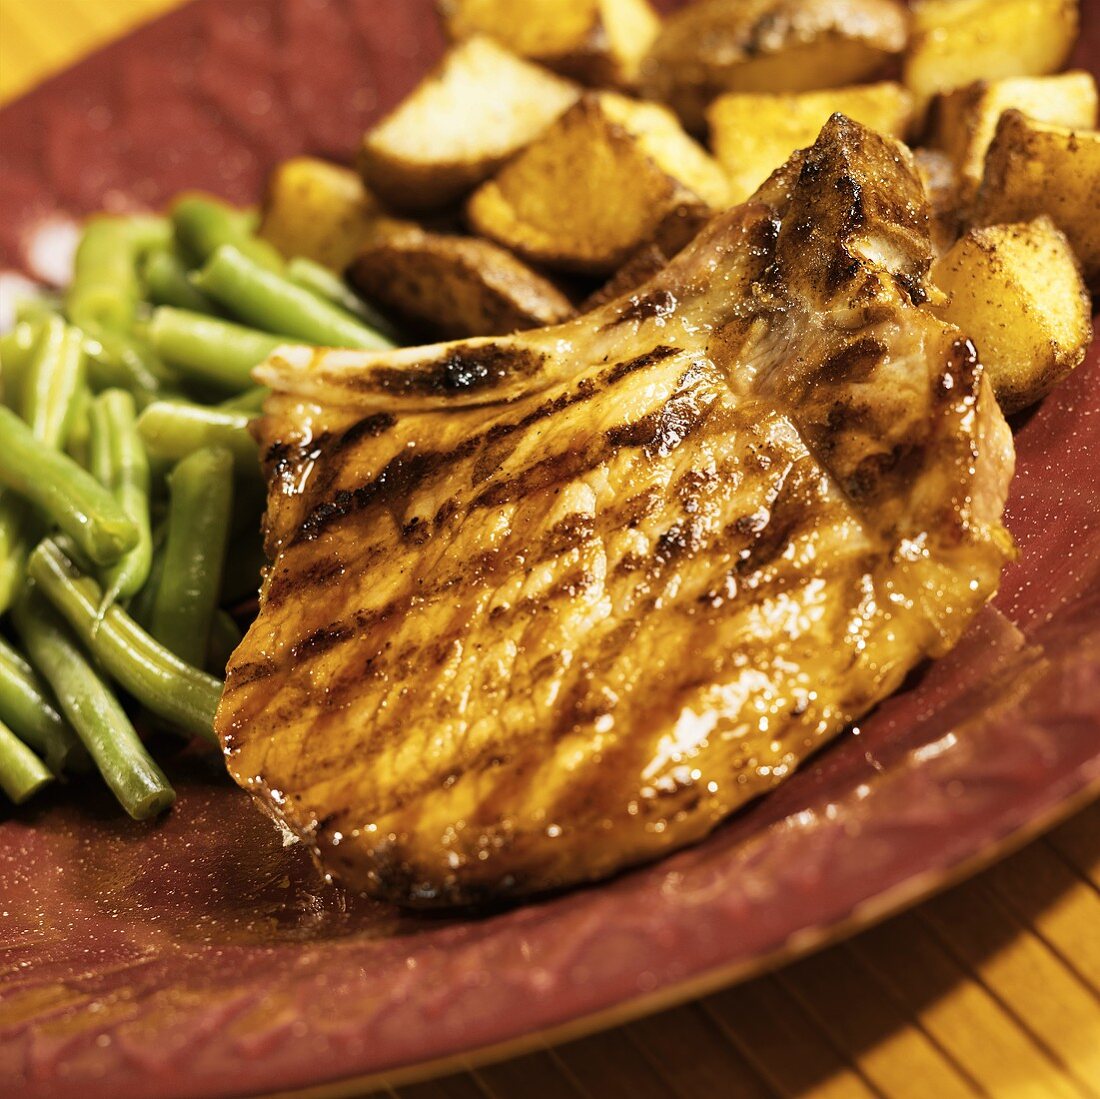 A Grilled Pork Chop with Honey-Maple Glaze, Green Beans and Potatoes